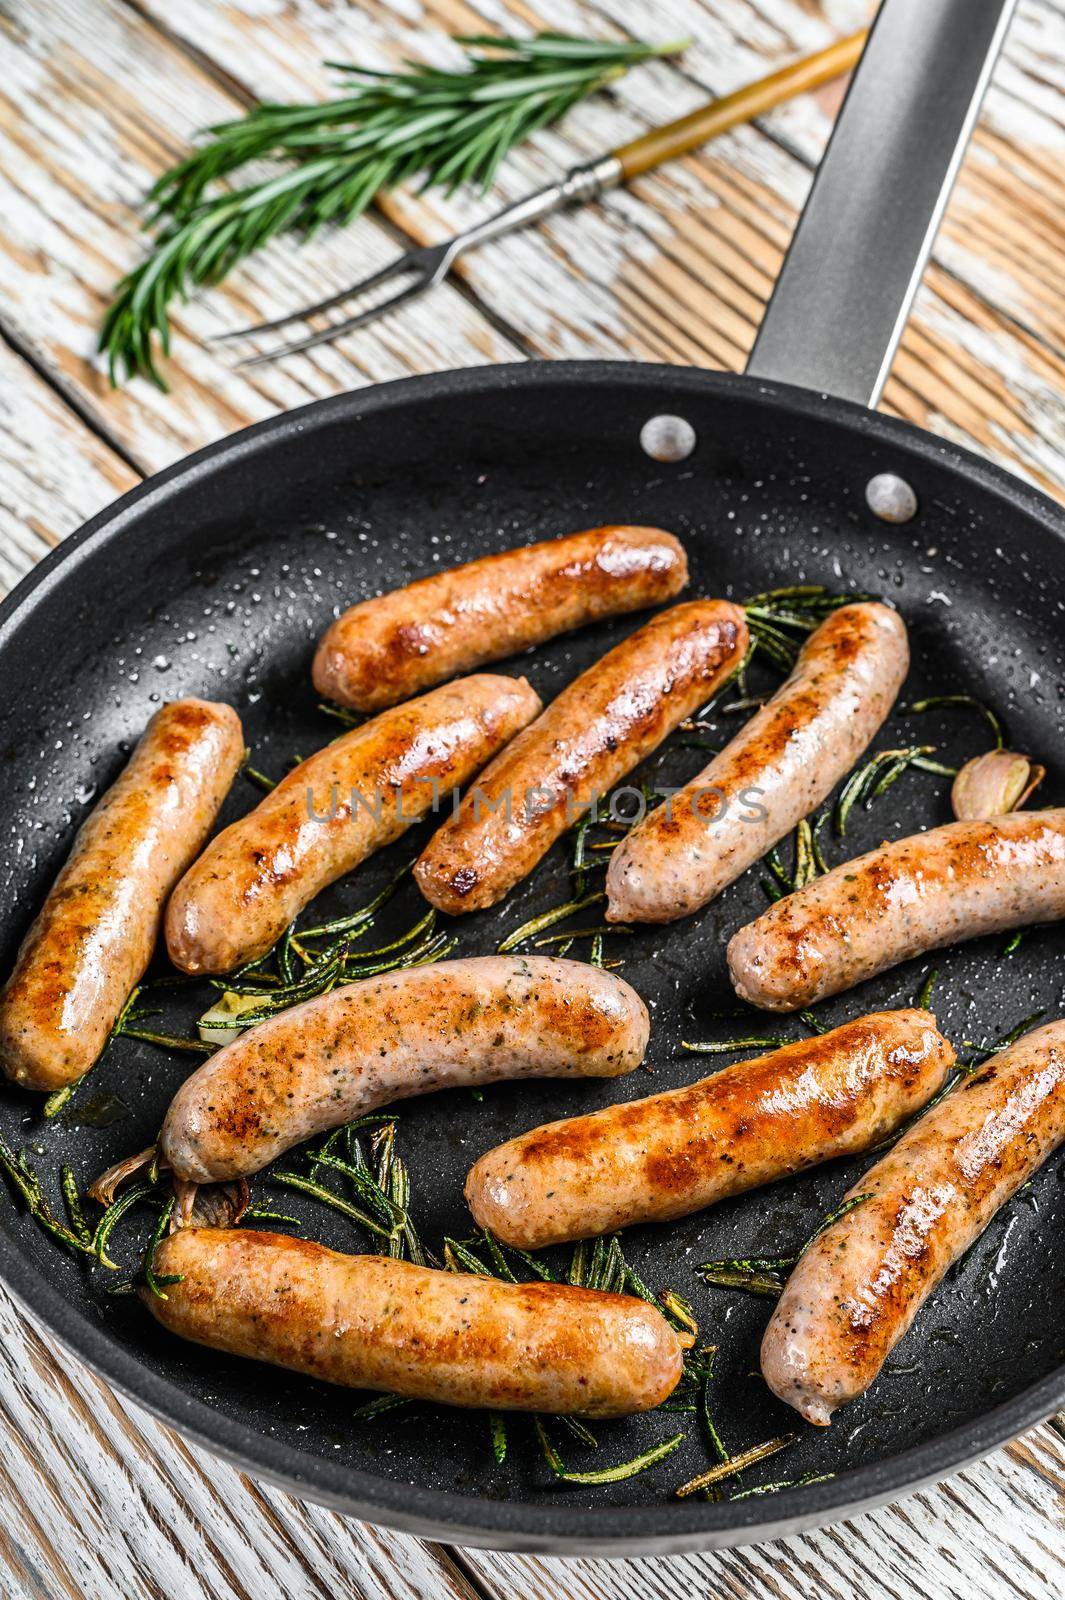 Homemade sausages fried in a pan, beef and pork meat. wooden background. Top view by Composter